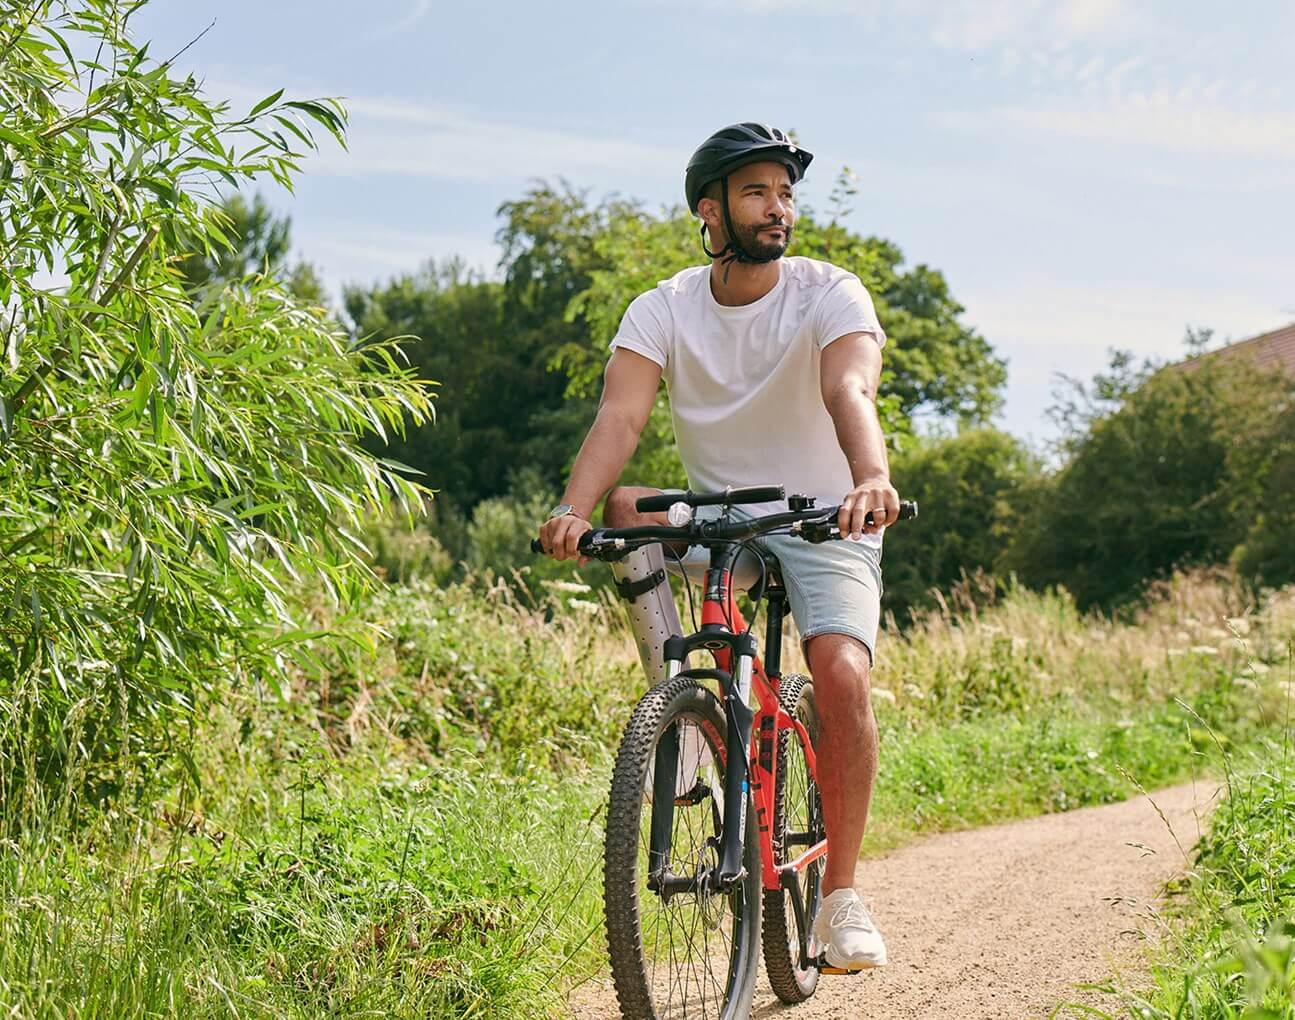 cyclist wearing helmet dressed in shorts and tshirt on country lane surrounded by trees and grass